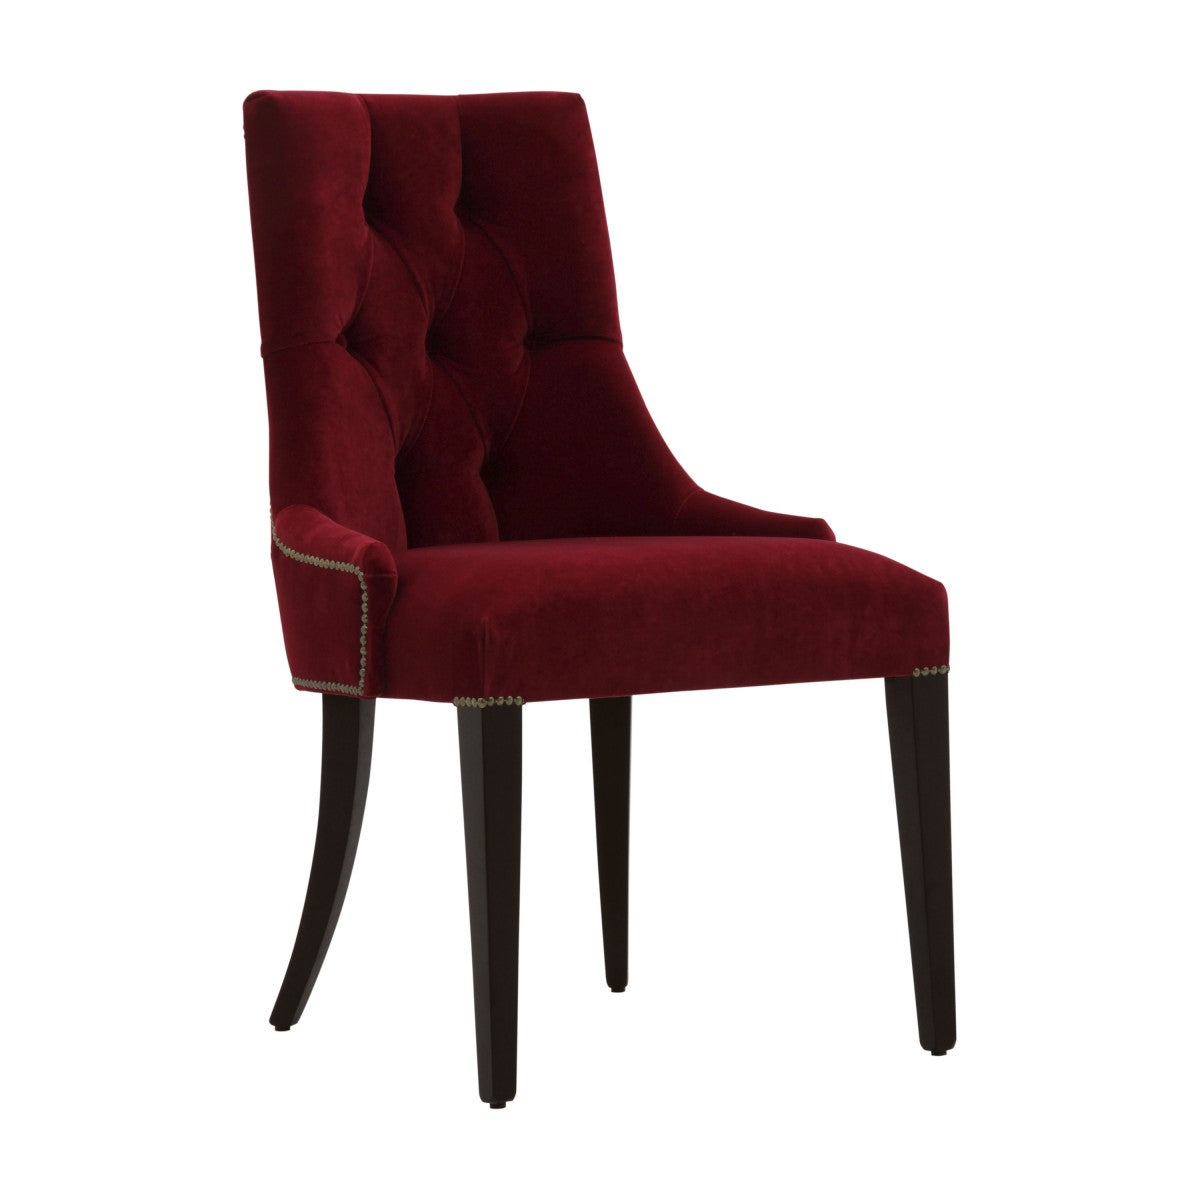 Olympia Bespoke Upholstered Modern Contemporary Dining Chair MS410S Custom Made To Order